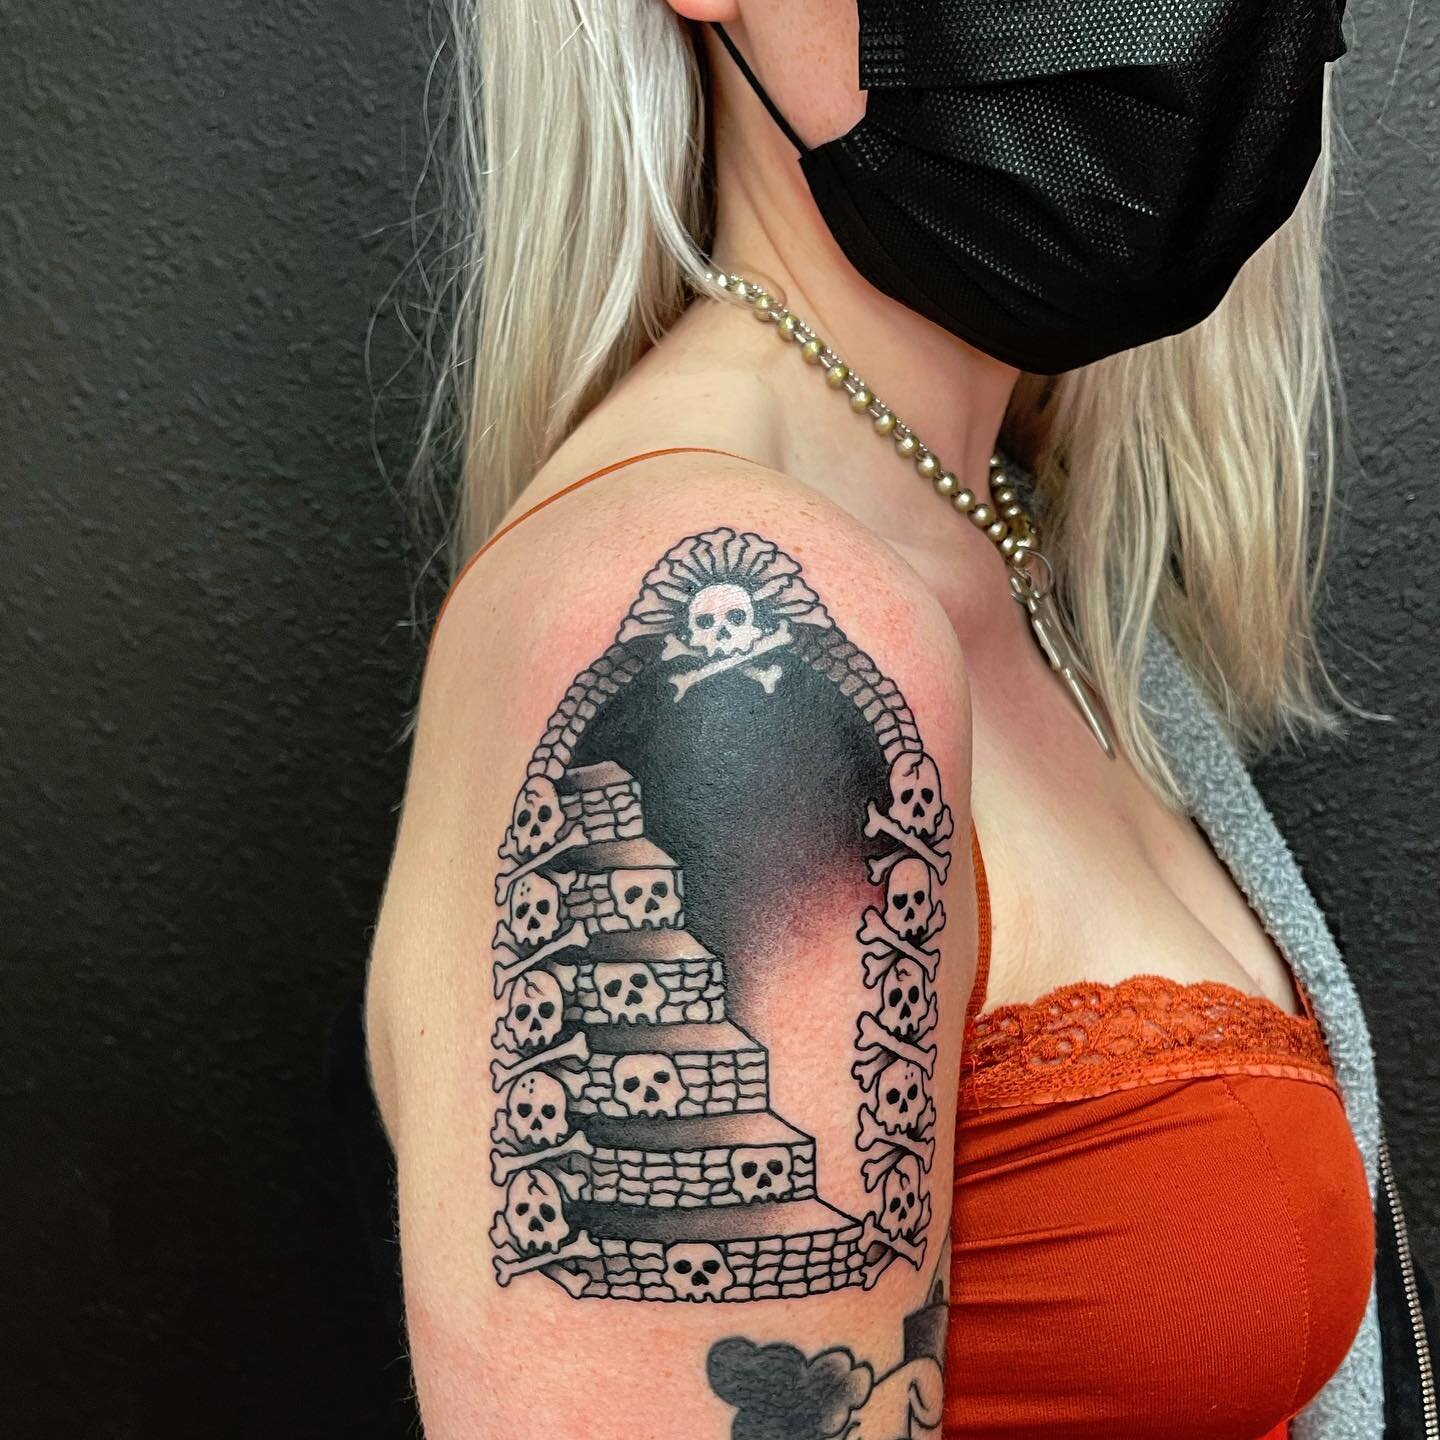 Thanks Zoe for picking from my flash. Always a pleasure. 

#catacombs #catacombsofparis #beware #dungeon #dungeondelve #proceedwithcaution #blacktattoos #blacktattoo #macabreart #gothtattoo #darktattoos #bayareatattooartist #americanatattoos #america